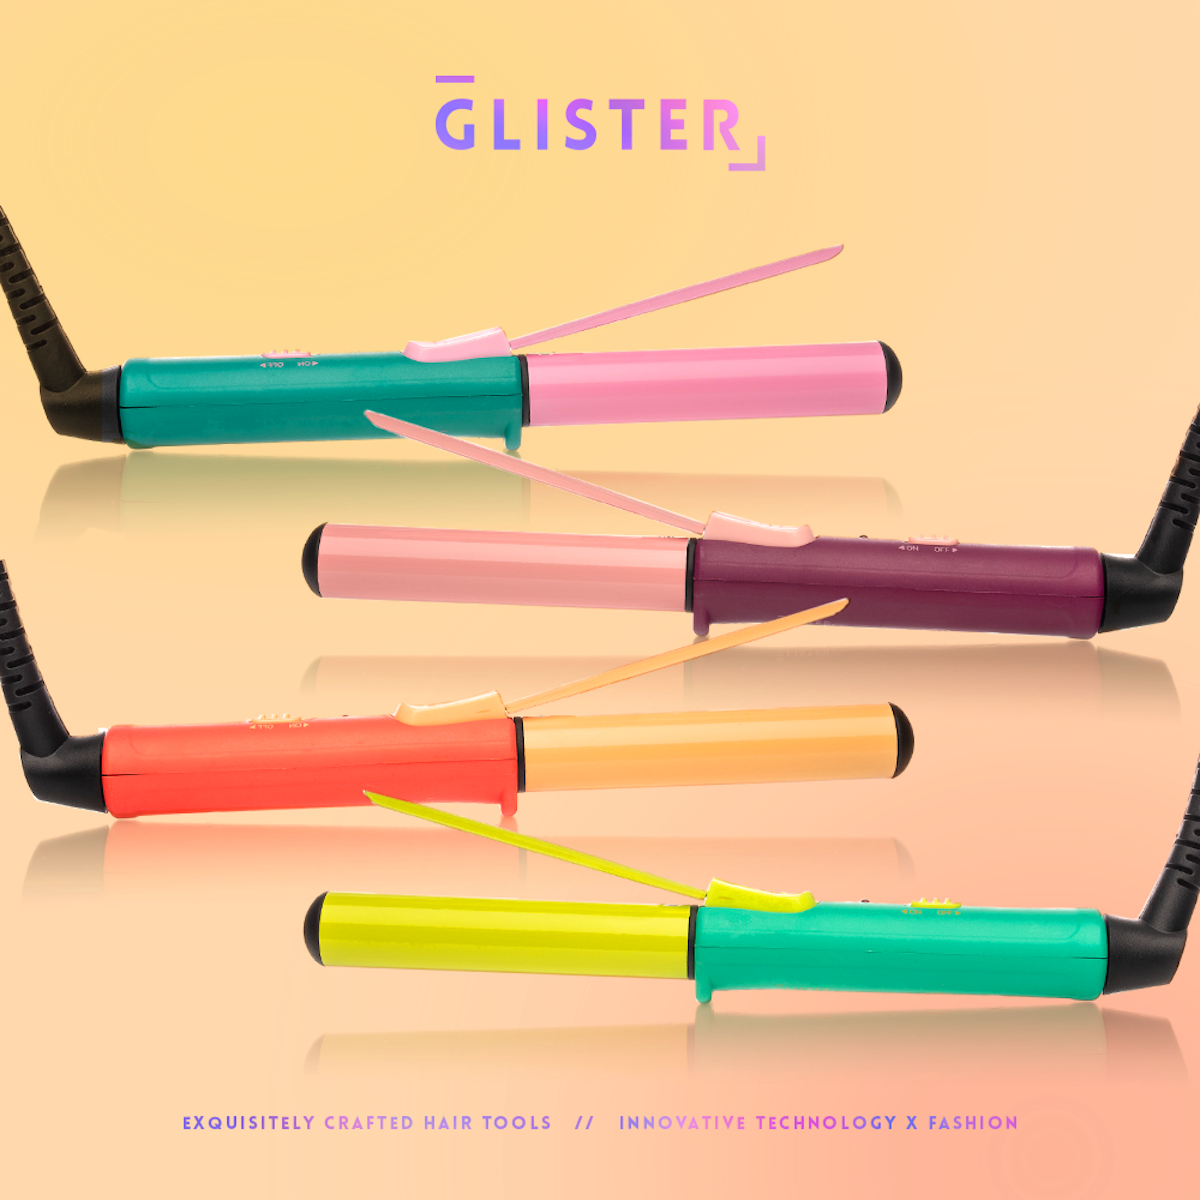 Glister "Mini Curls" Travel Clip Curler with Carrying Pouch - HAB 